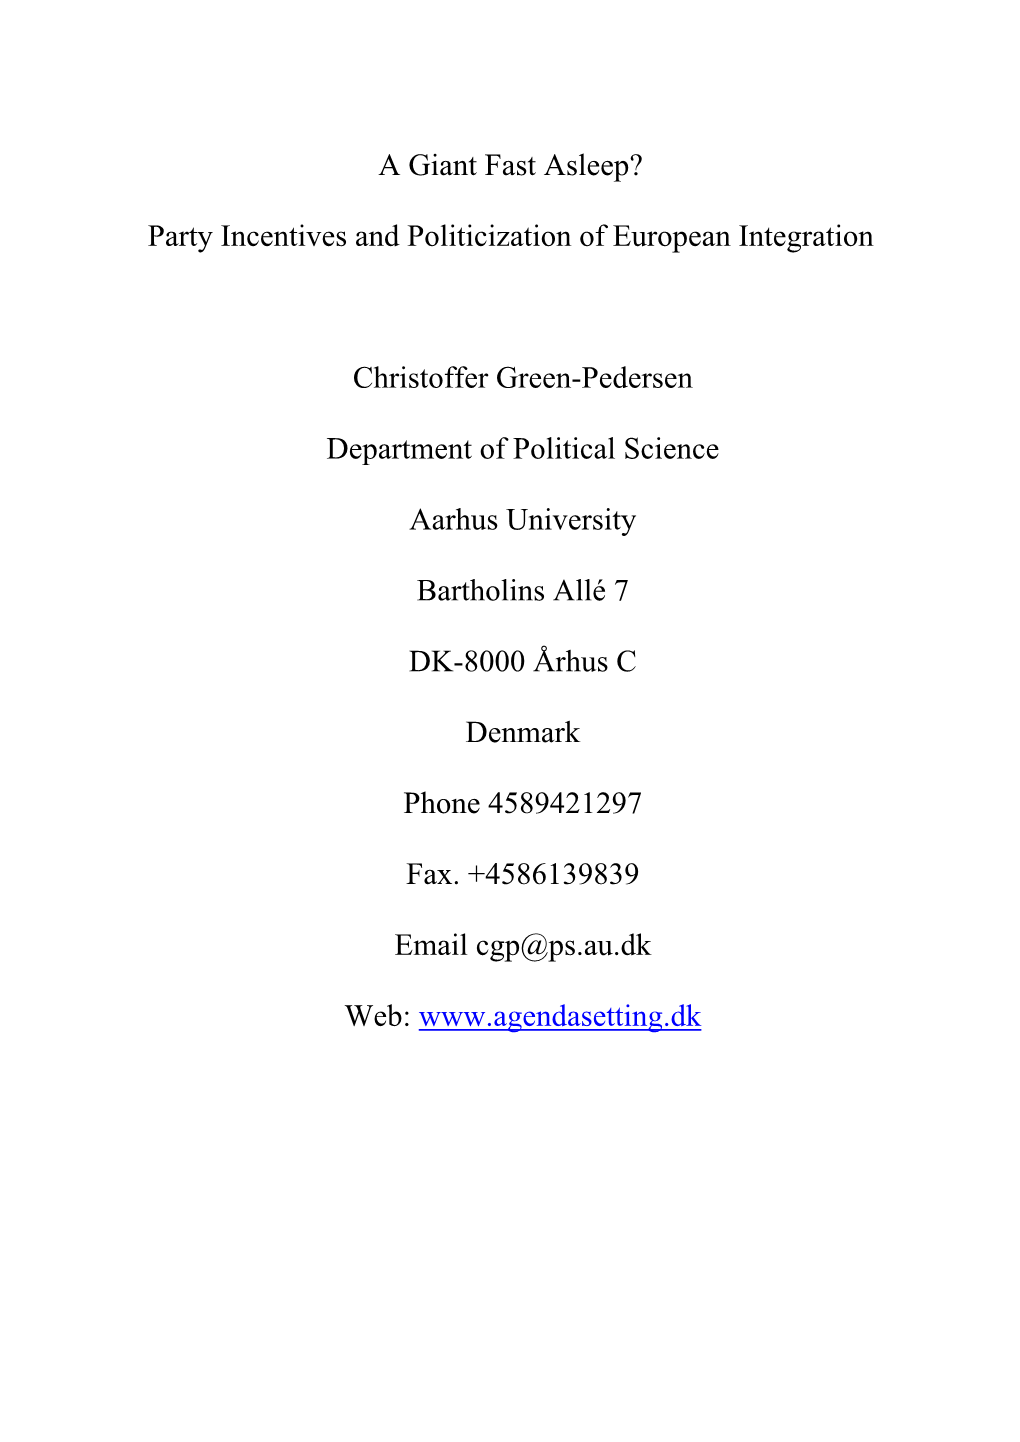 A Giant Fast Asleep? Party Incentives and Politicization of European